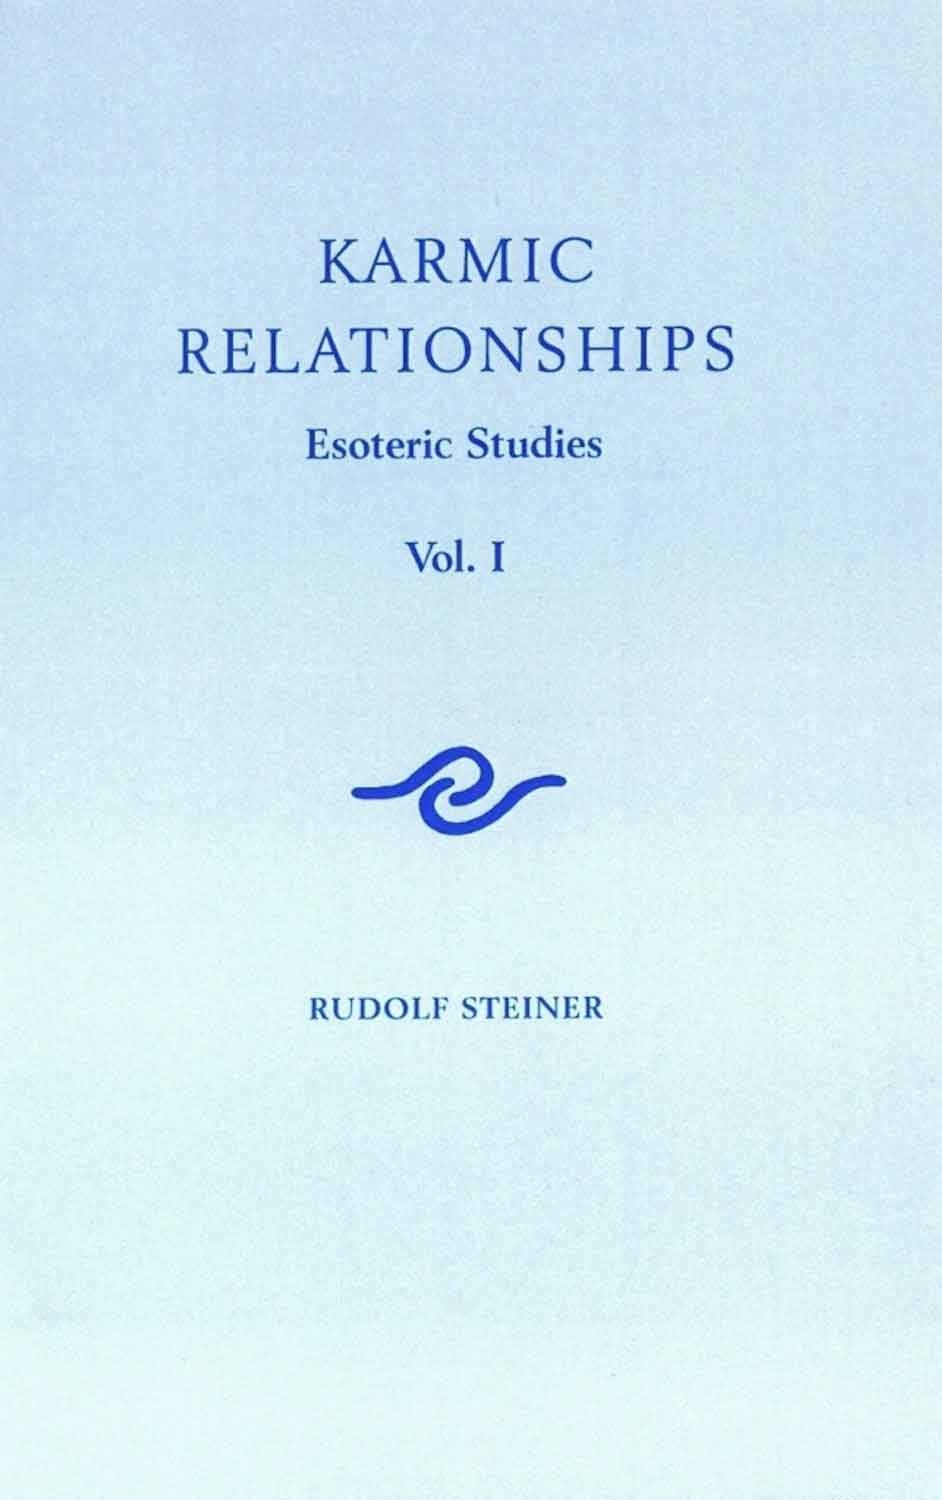 Episode 54: Lecture 54: Karmic Relationships given on July 8 1924 by Rudolf Steiner